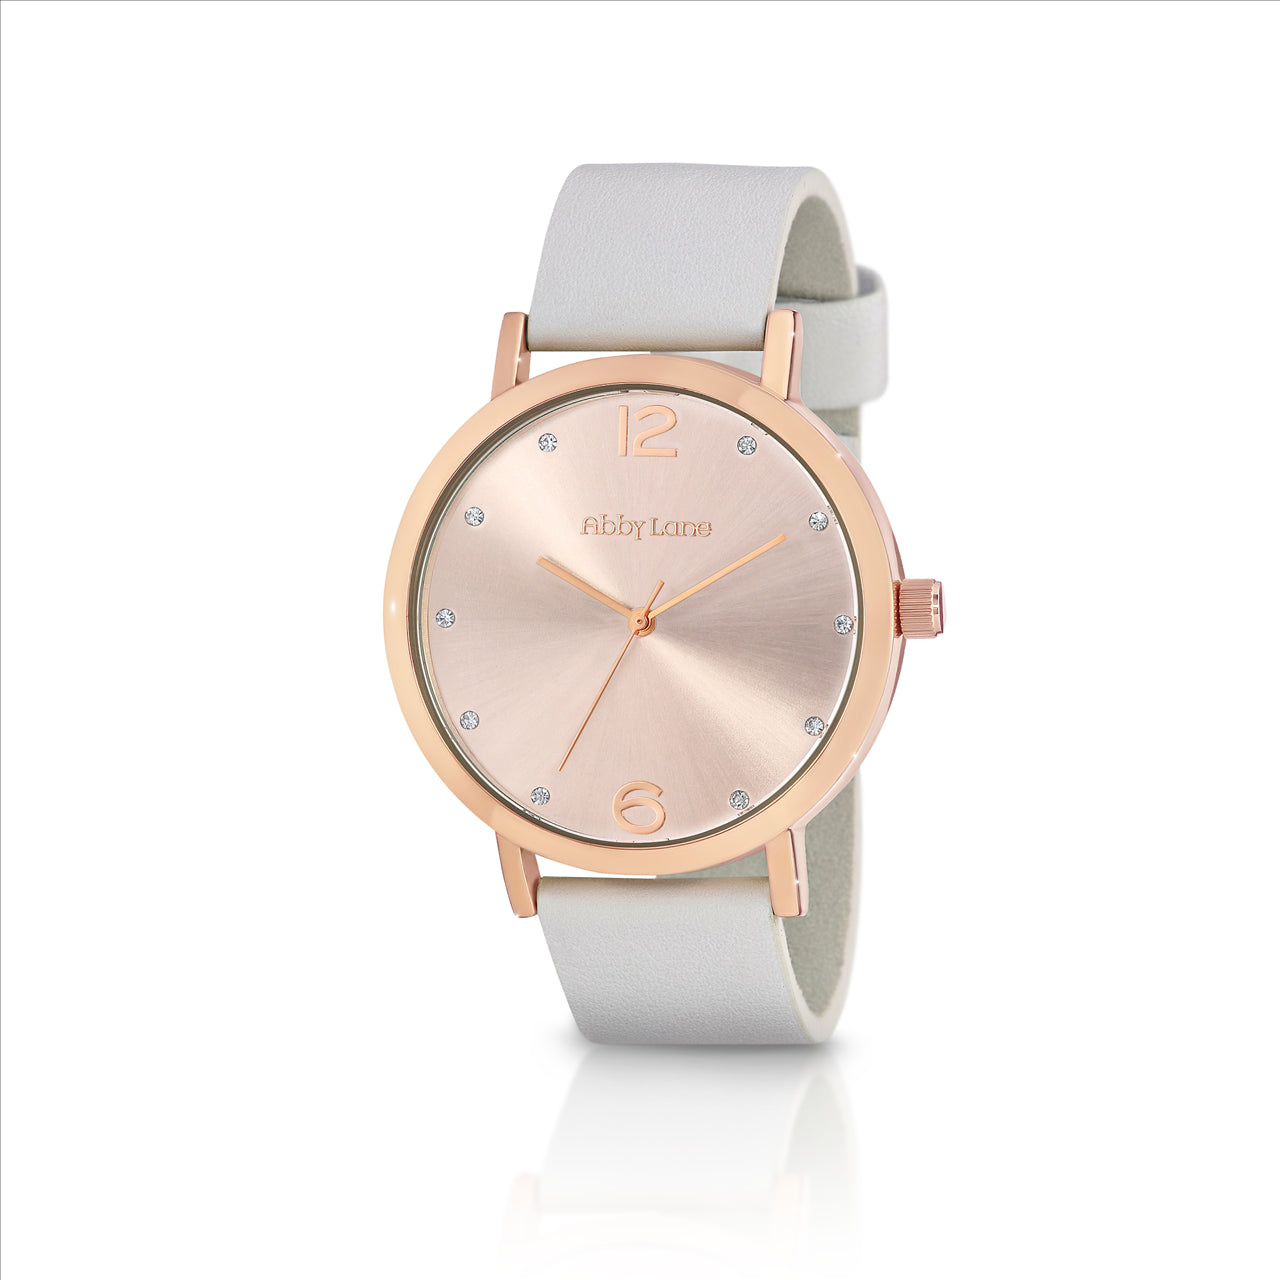 Abby lane audrey rosetone case. rose dial with rose accents and crystals. white leather strap. case size 42mm